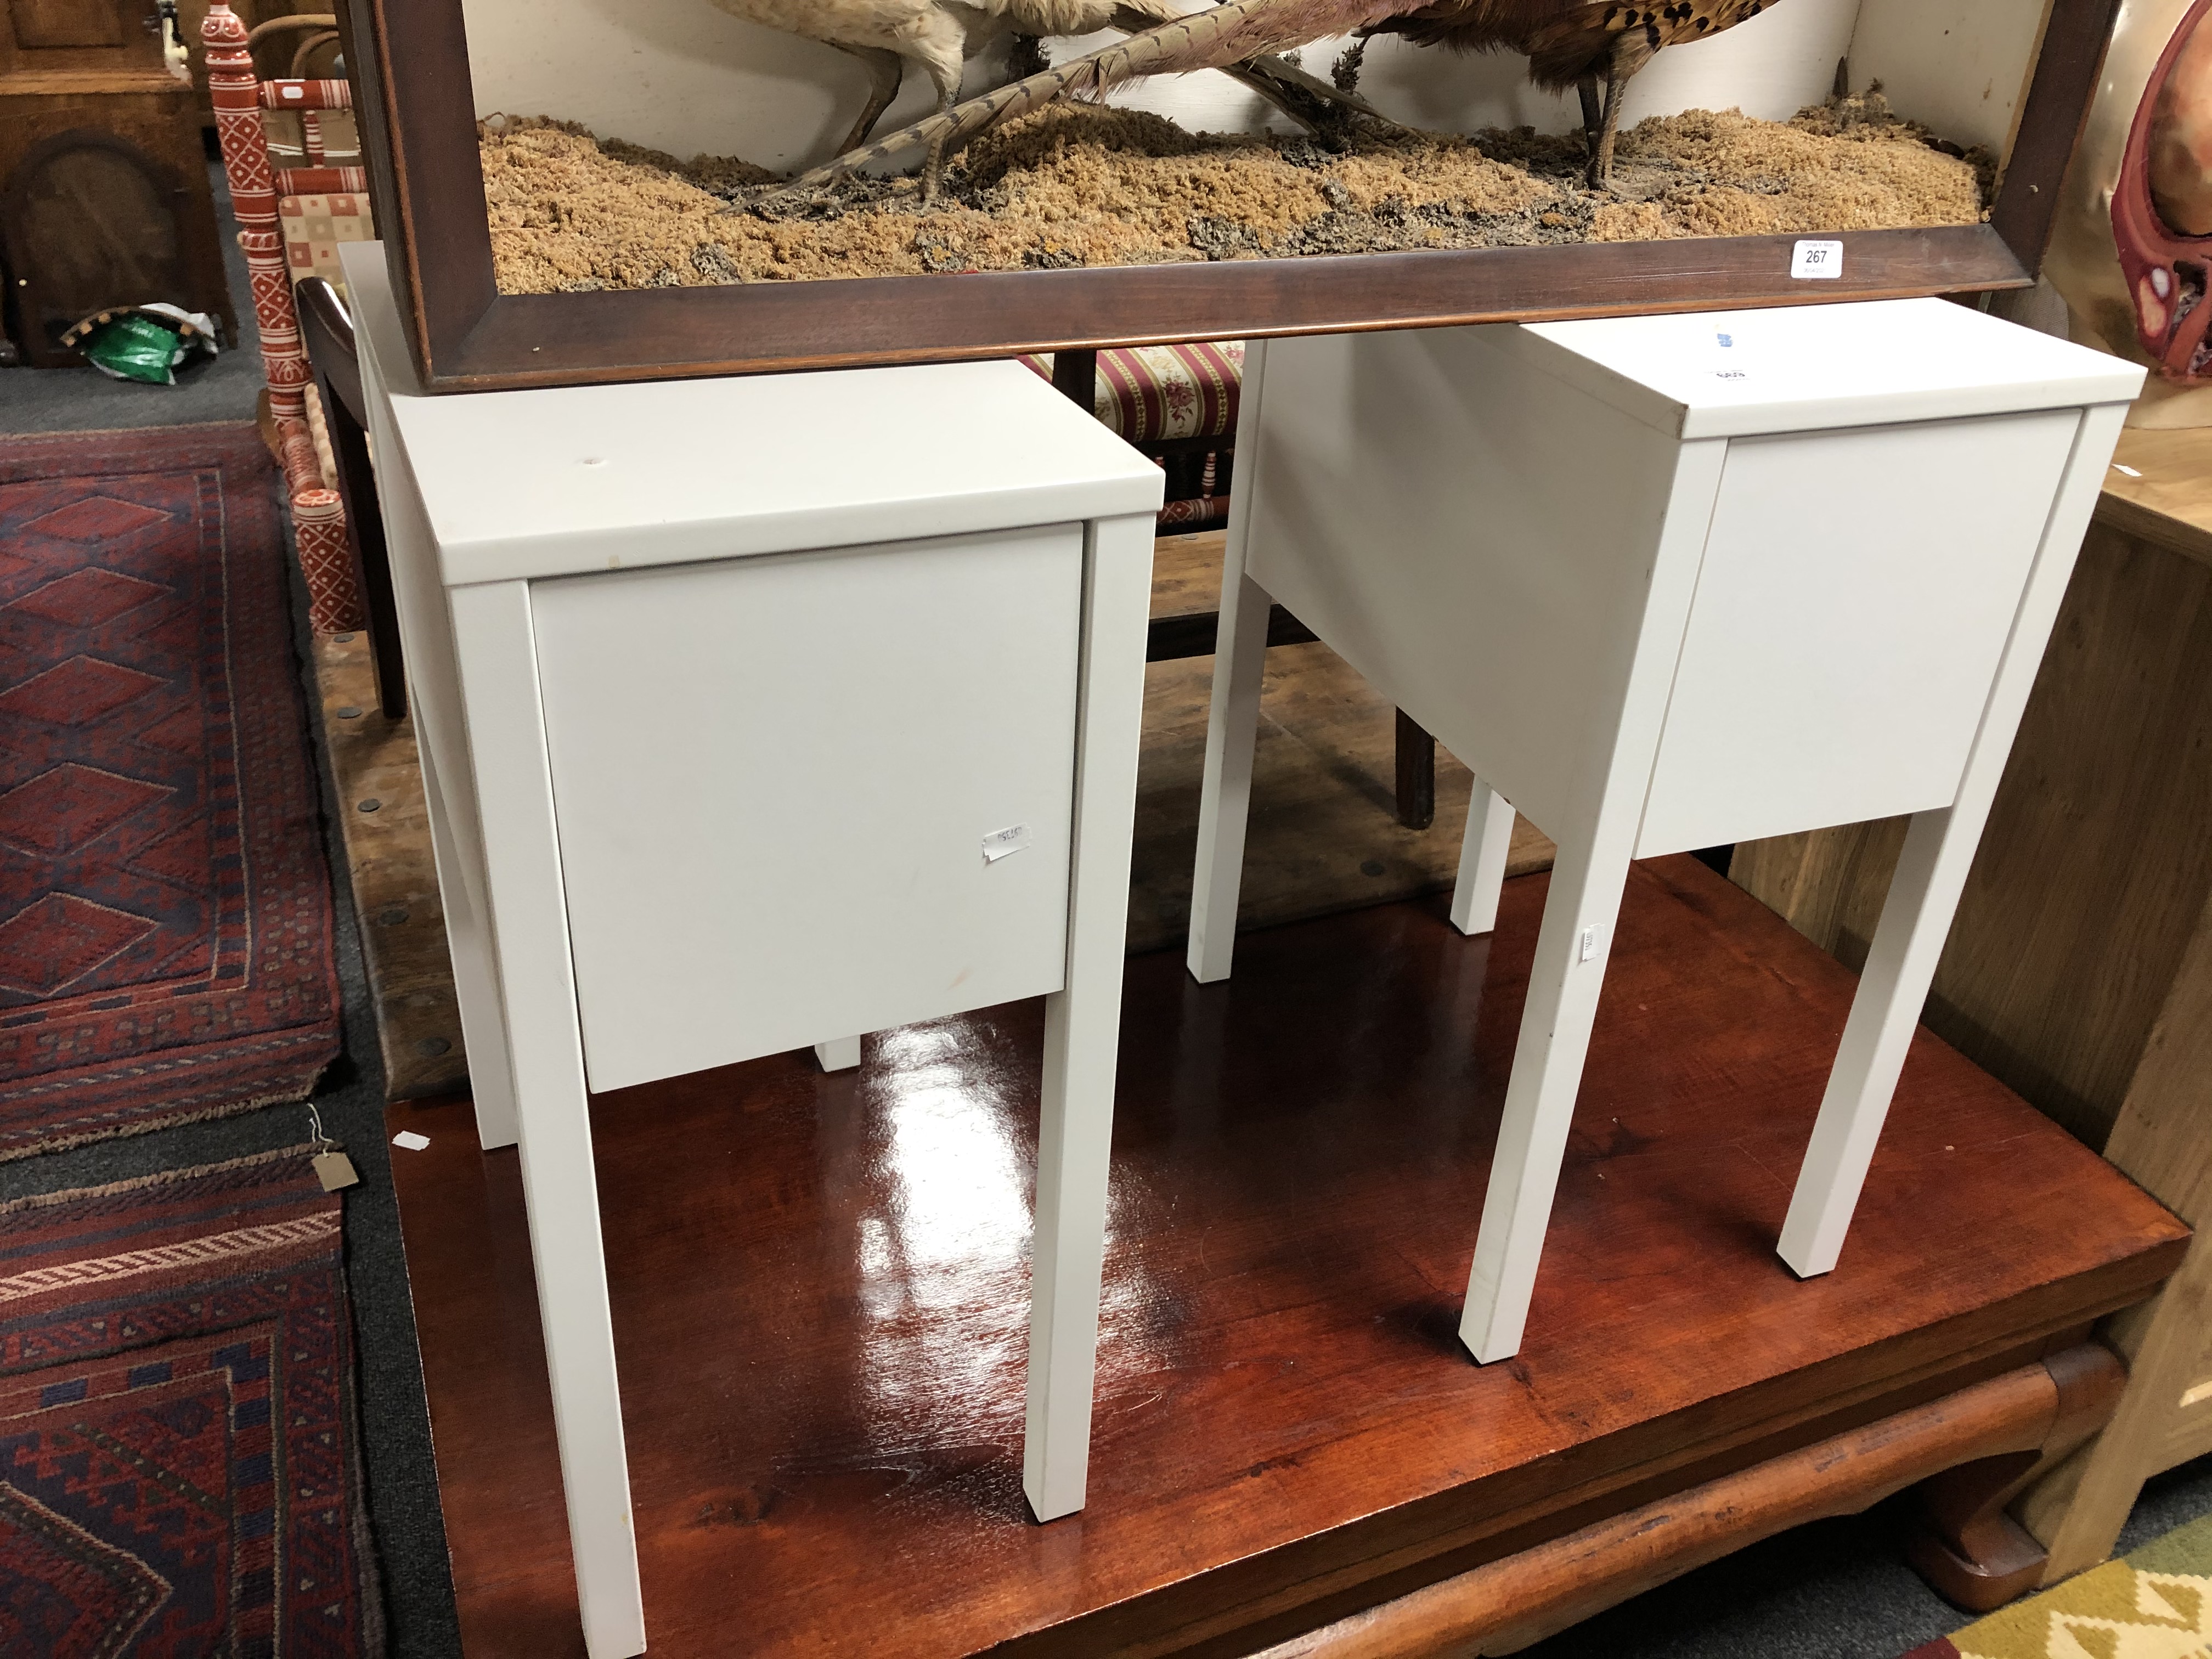 A pair of contemporary white bedside stands fitted a drawer